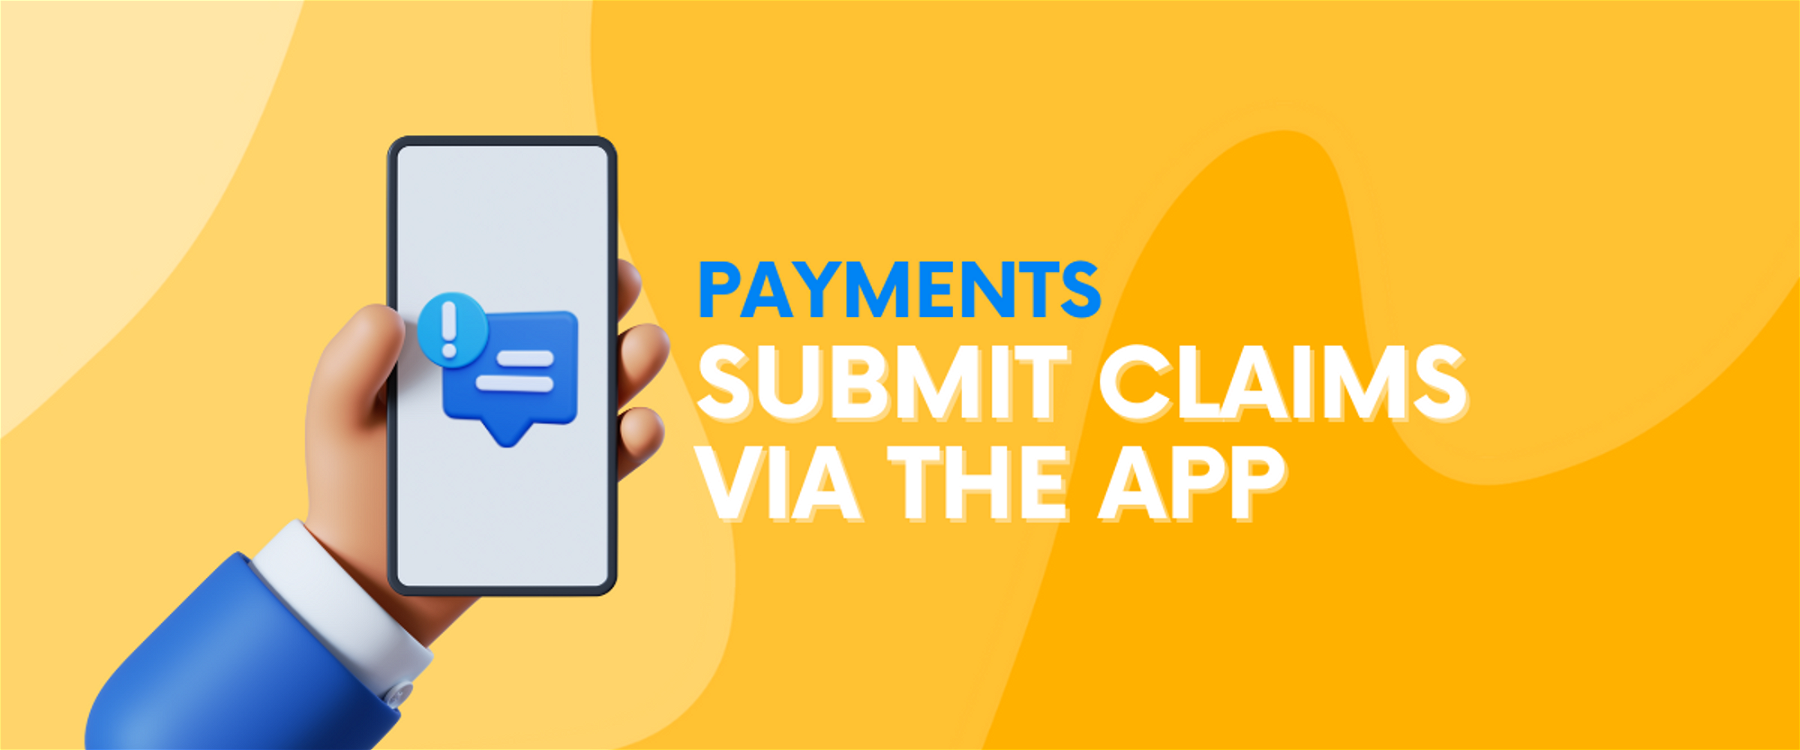 Where To Submit Claims?